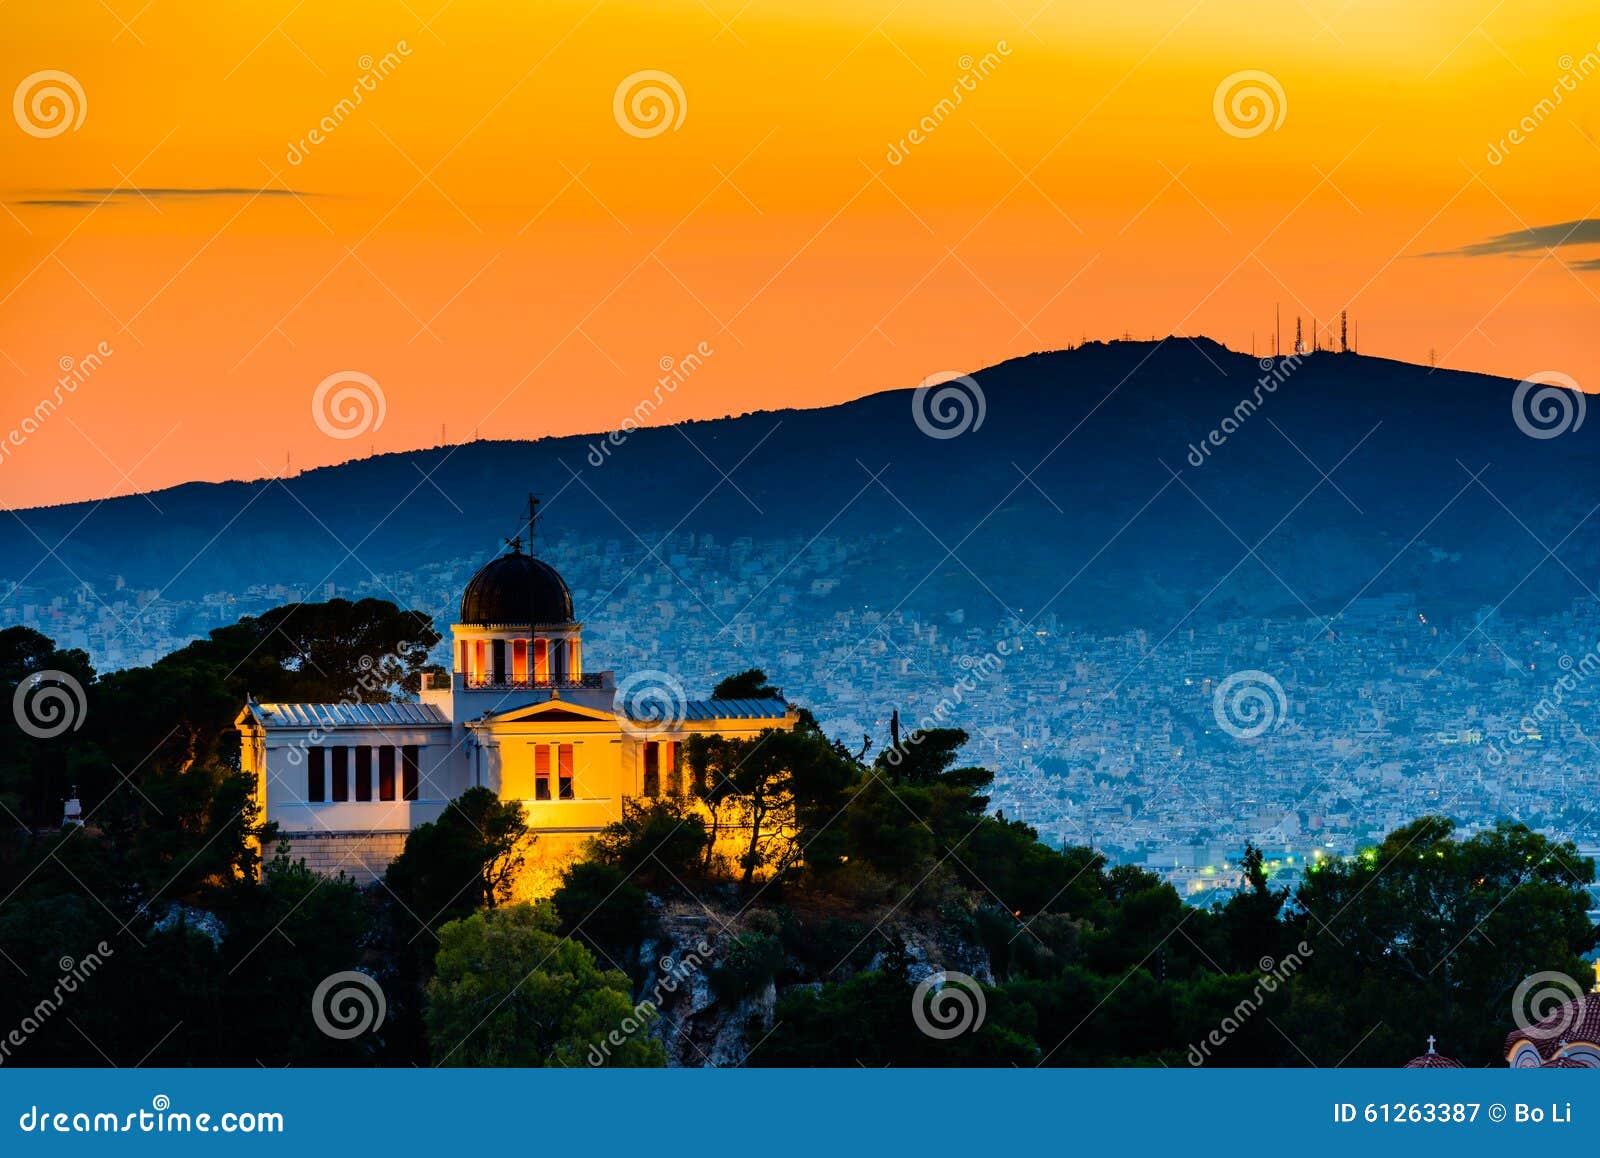 night scenes of national observatory at athens